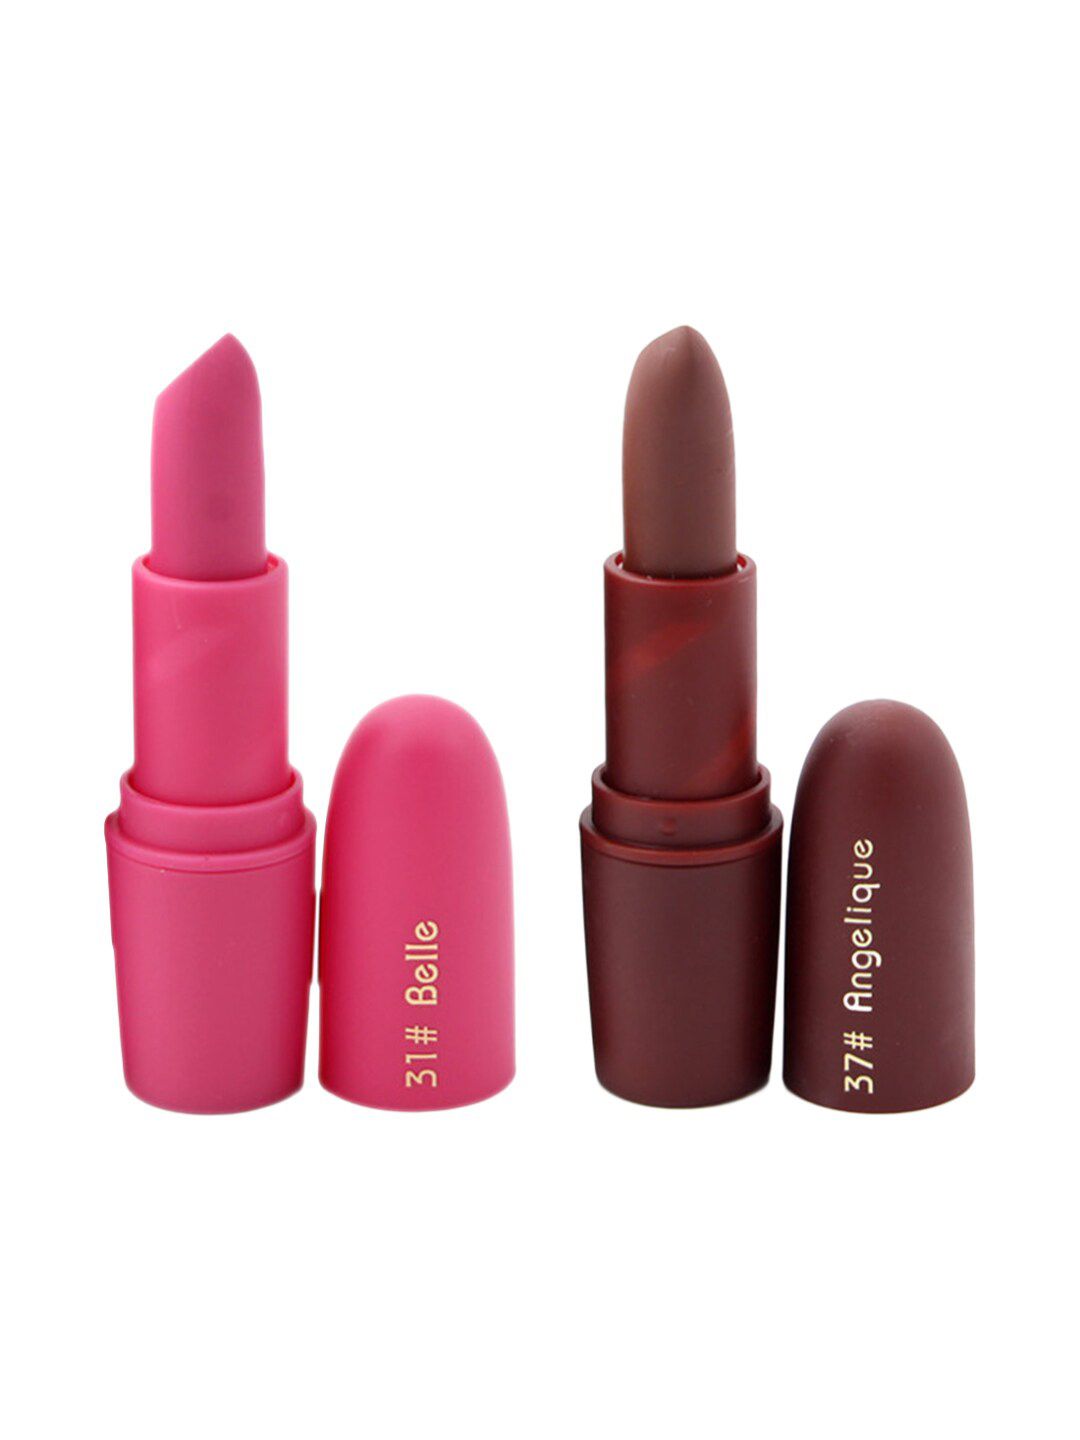 MISS ROSE Professional Make-Up Set of 2 Matte Creamy Lipsticks - Belle 31 & Angelique 37 Price in India